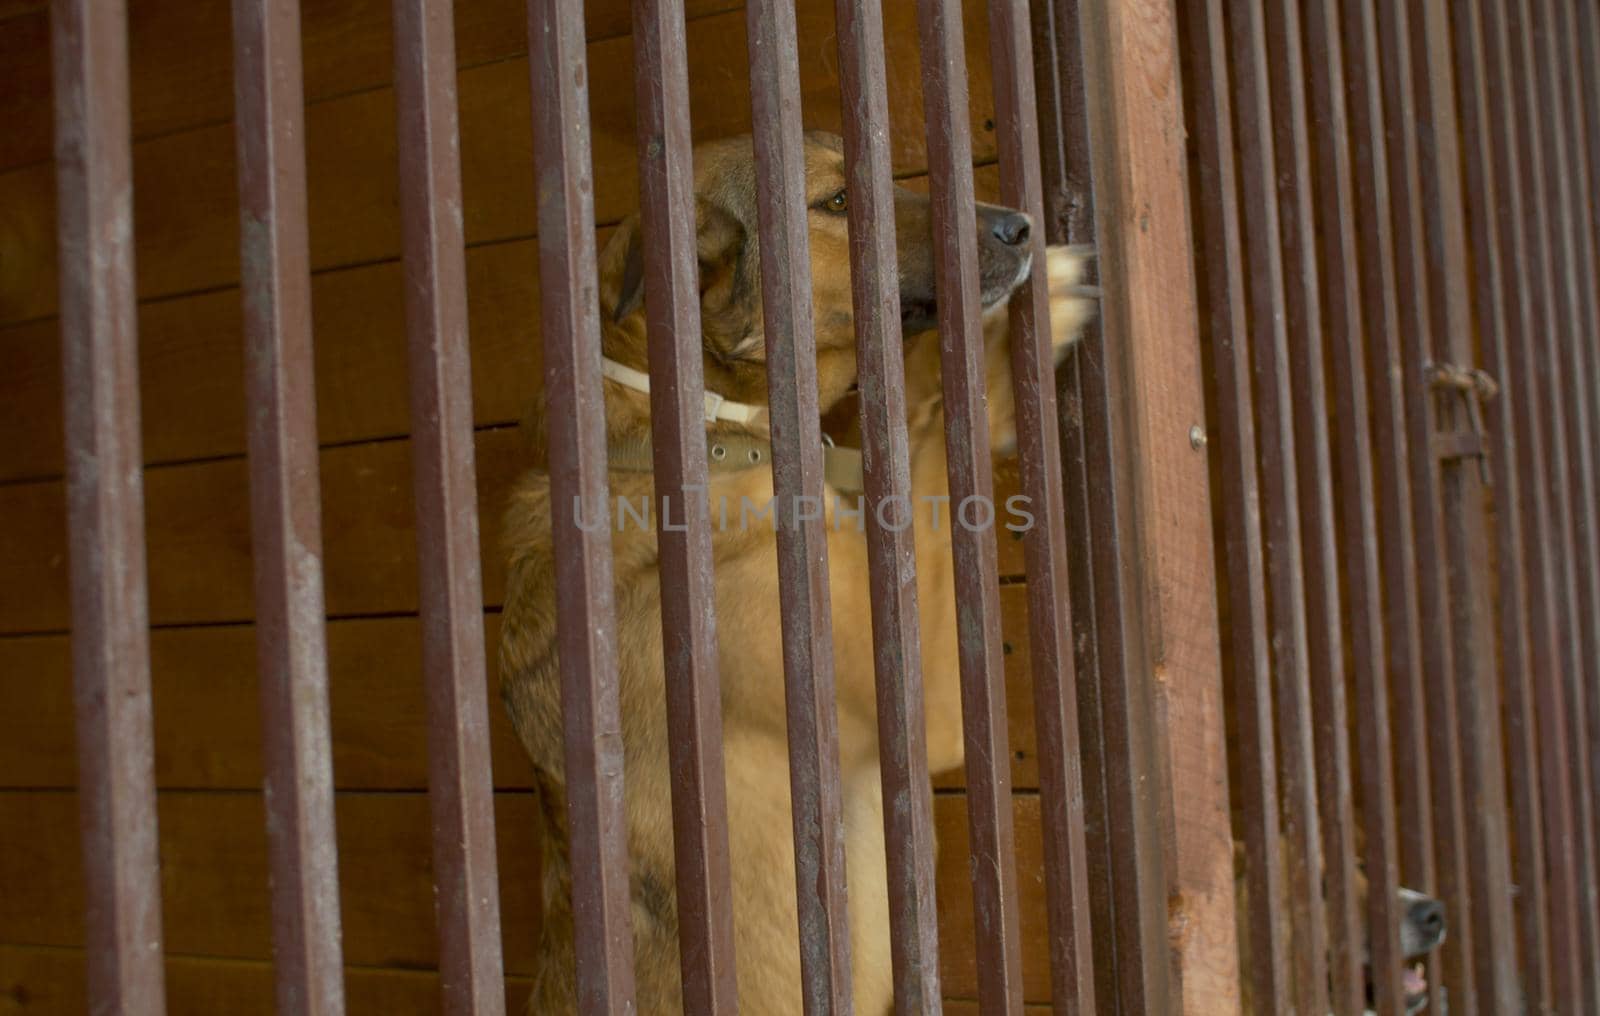 A dog in an aviary in a dog kennel scratches the fence